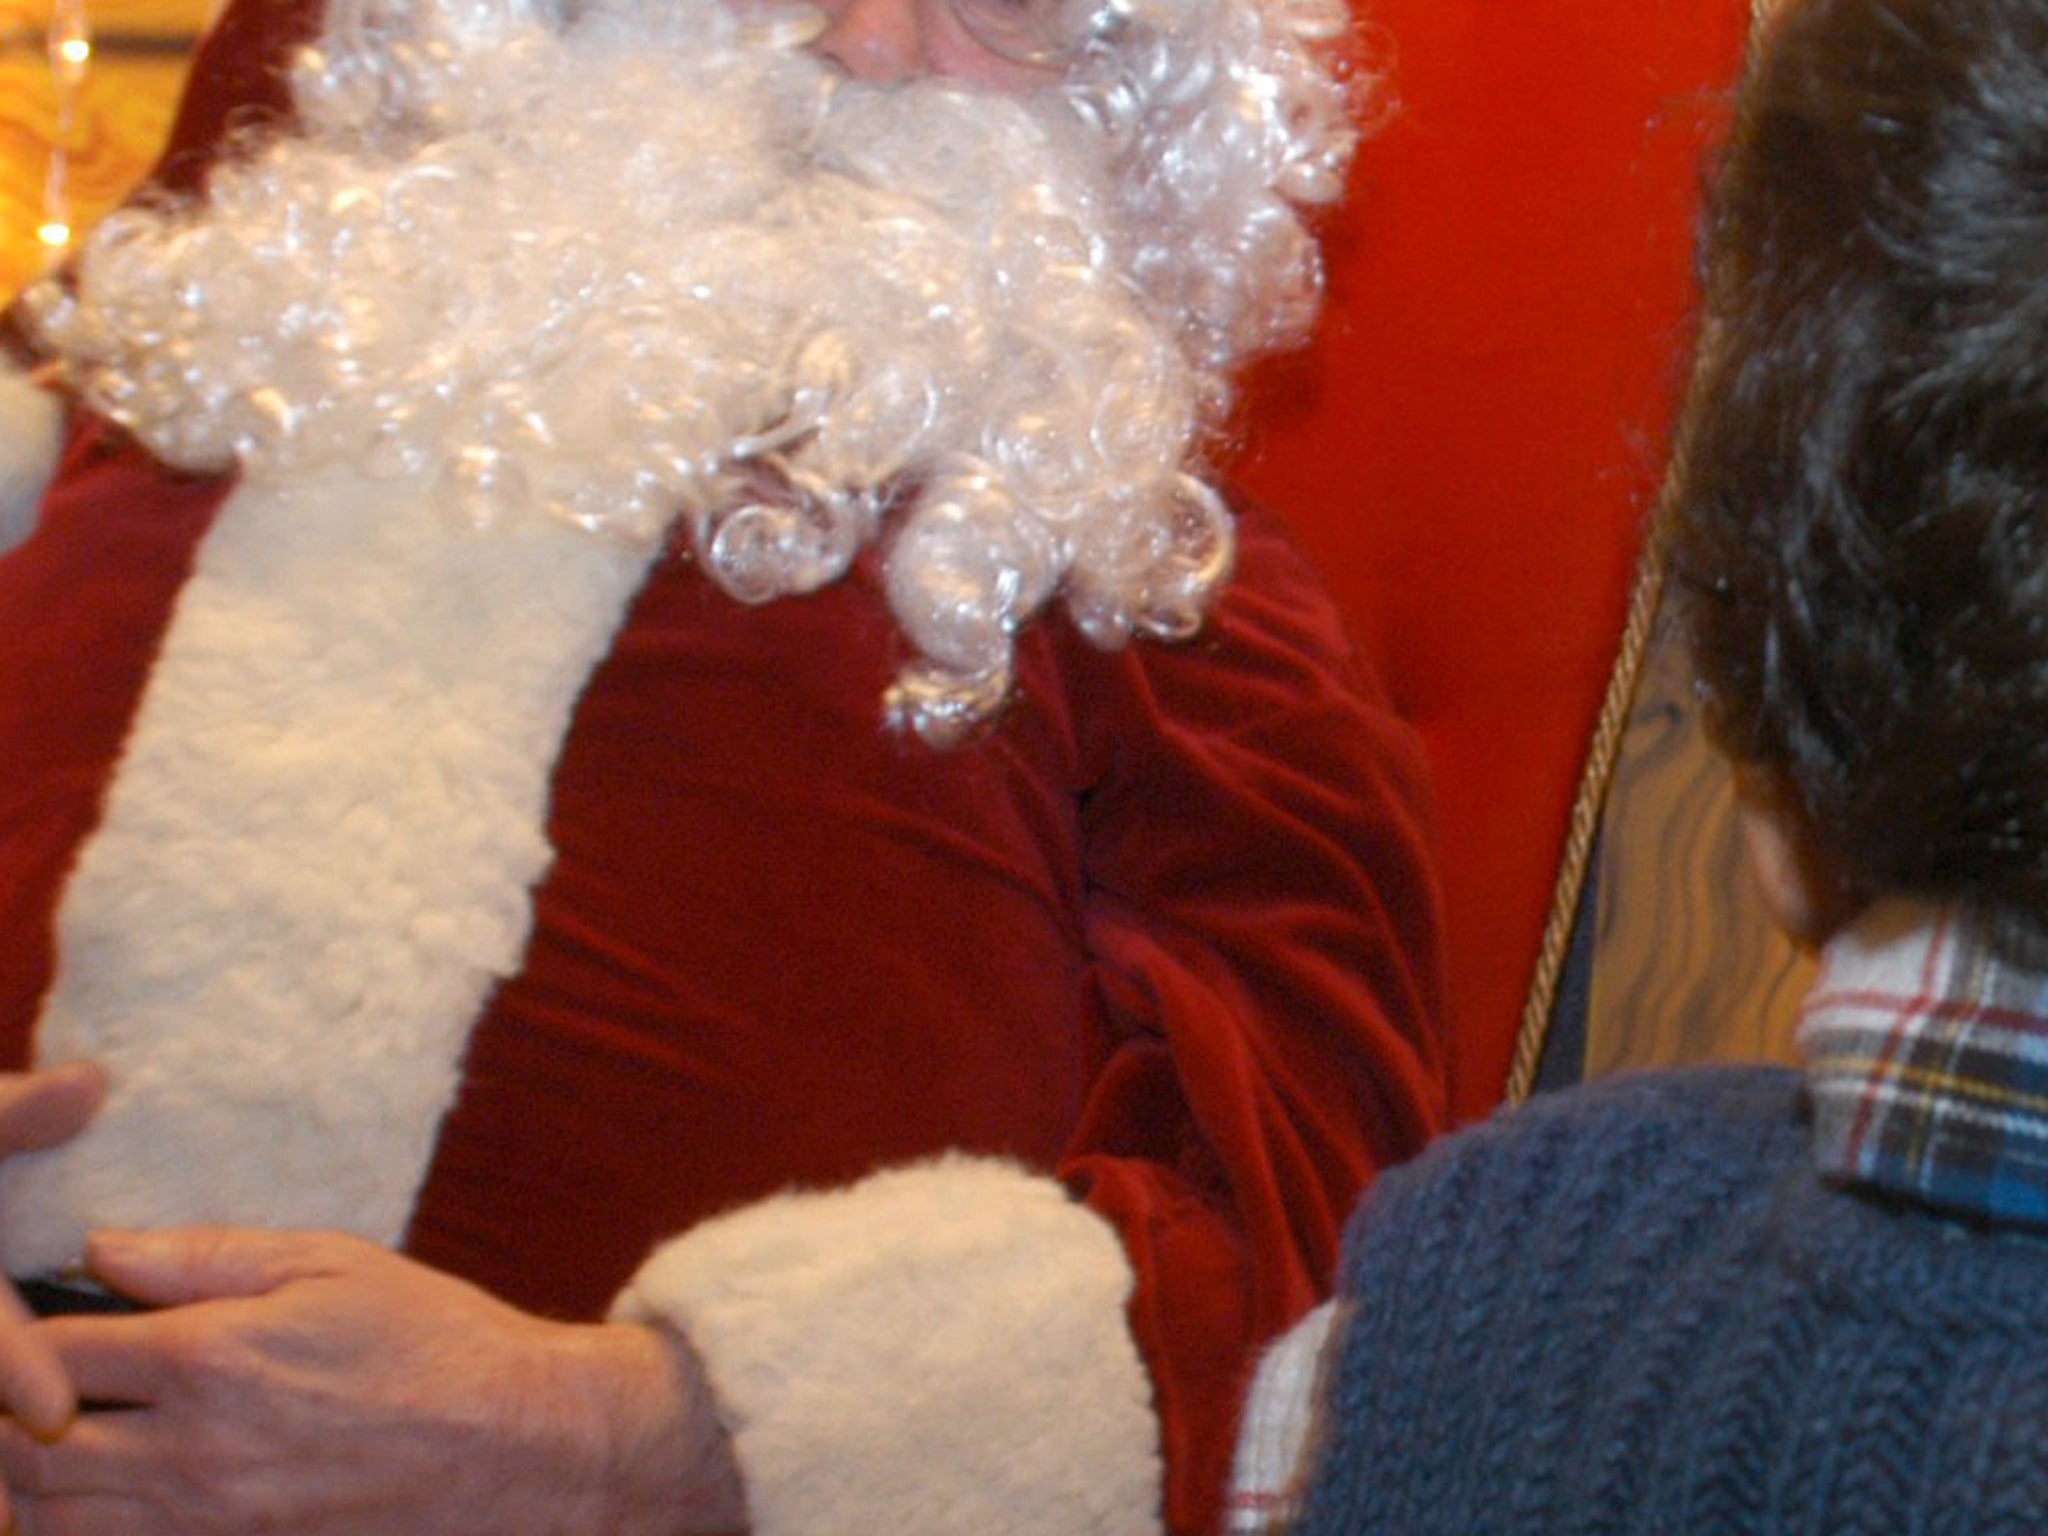 The man allegedly took a ten-year-old boy aside and told him that Santa isn't real